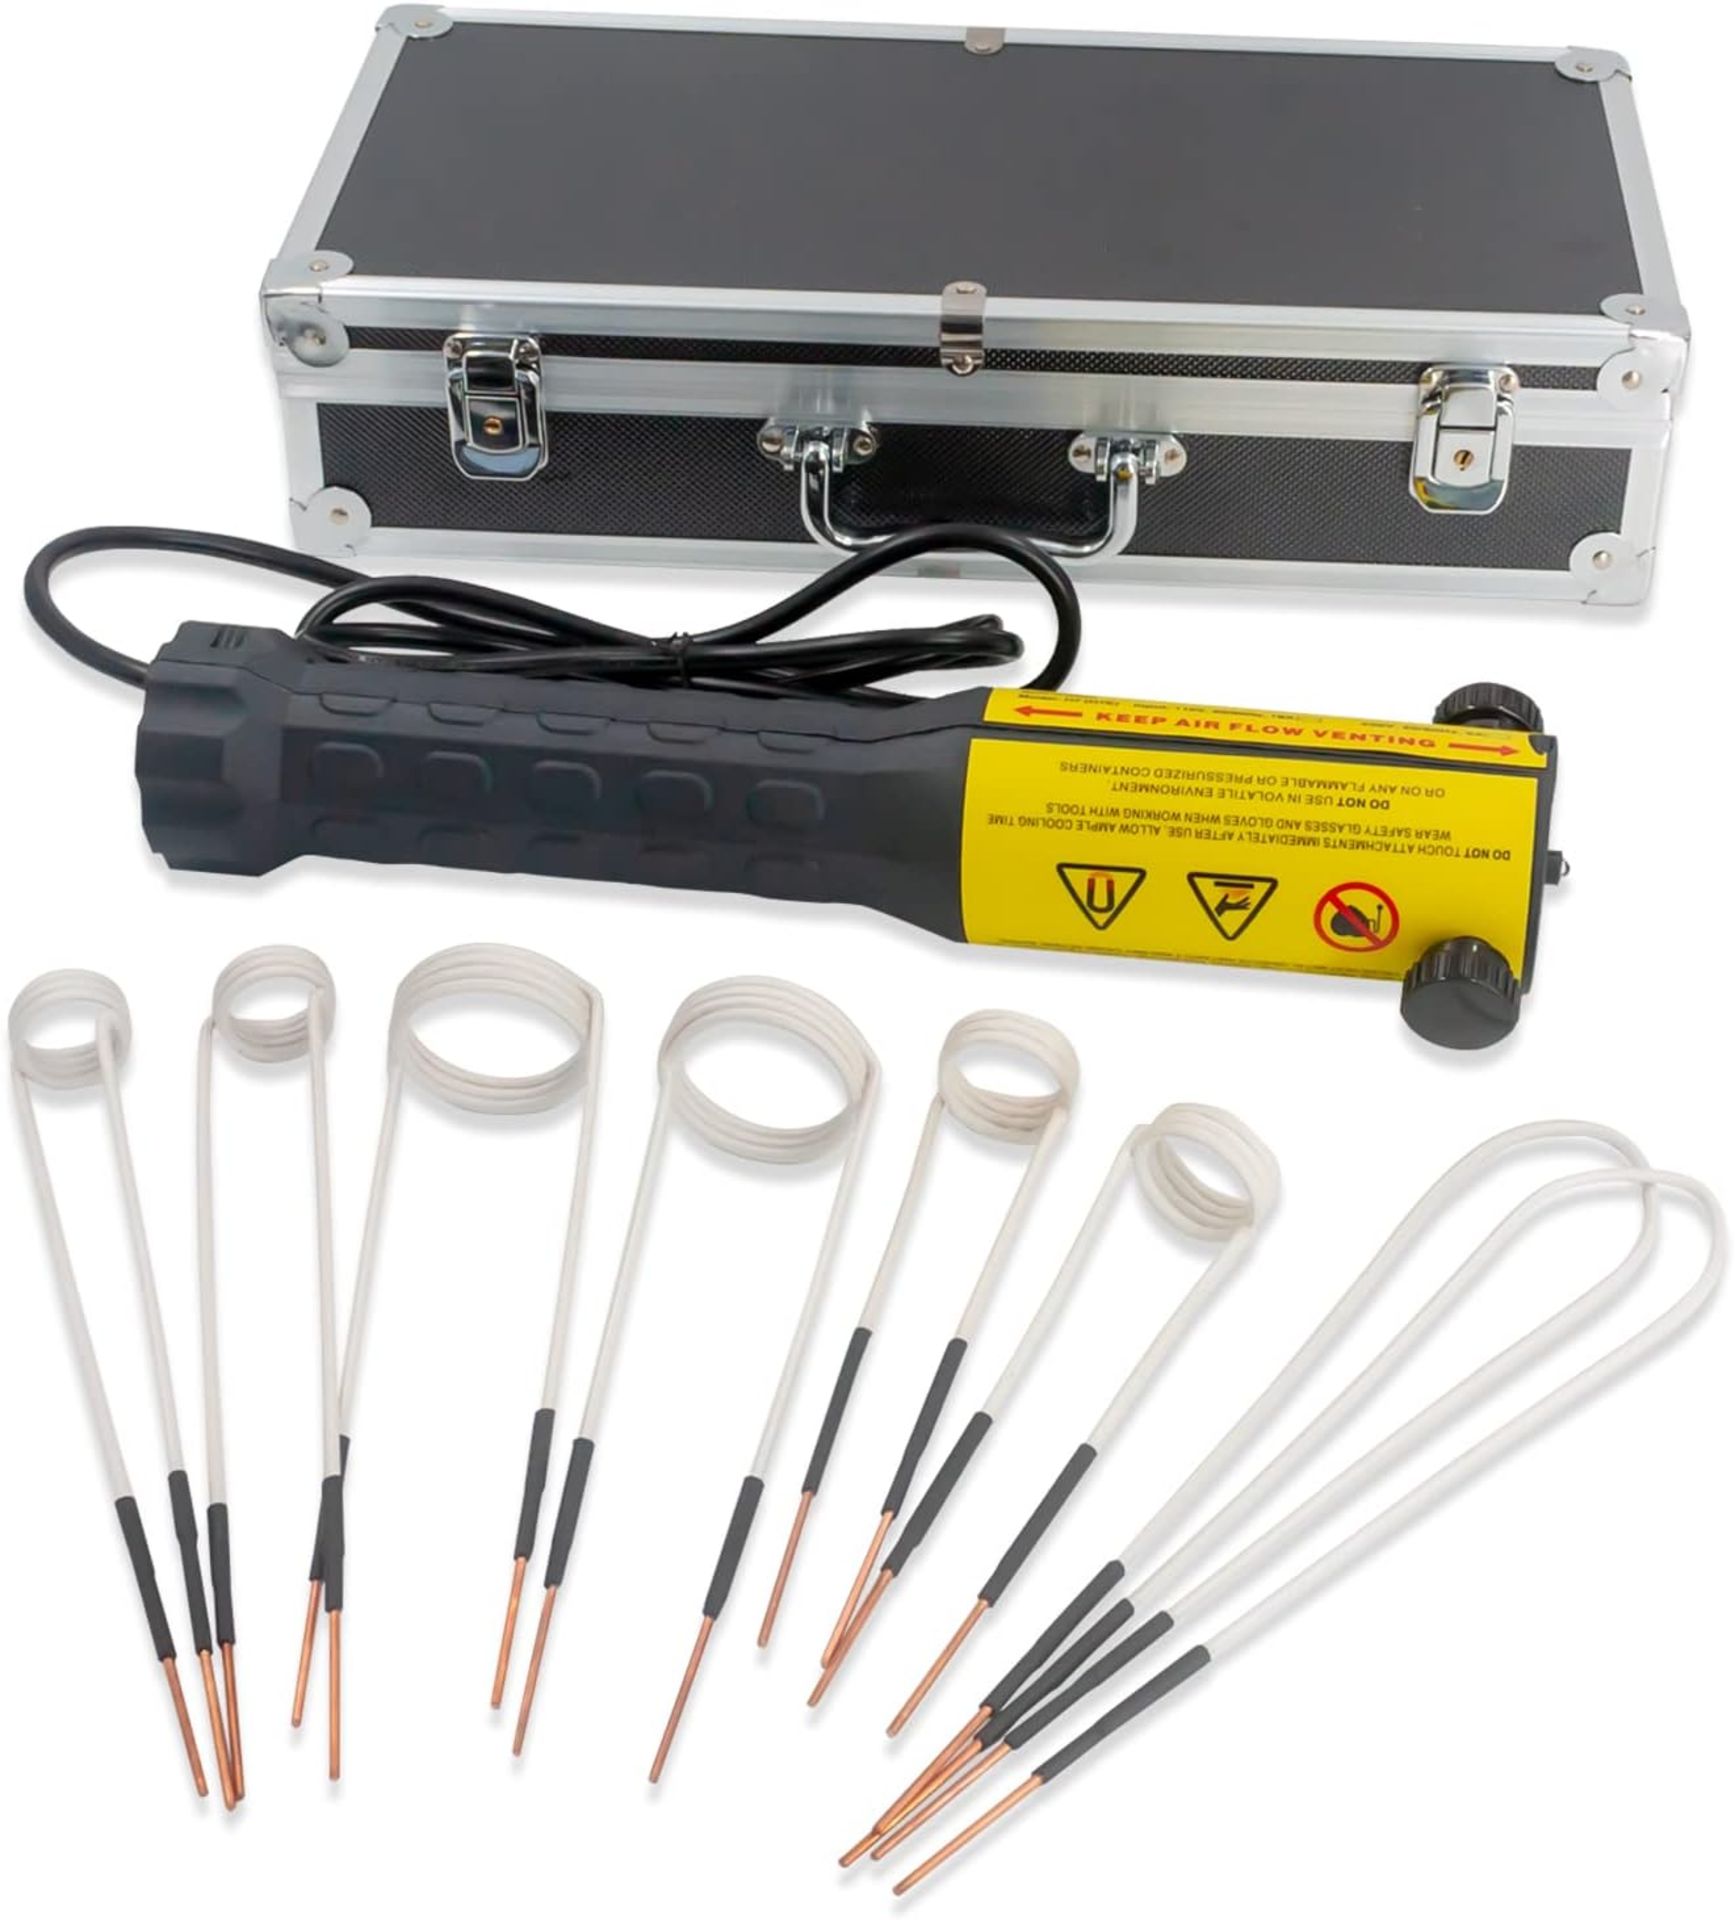 RRP £199.99 Solary Magnetic Induction Heater Kit, 1000W 220V Flameless Heat Tool for Bolt Removal,